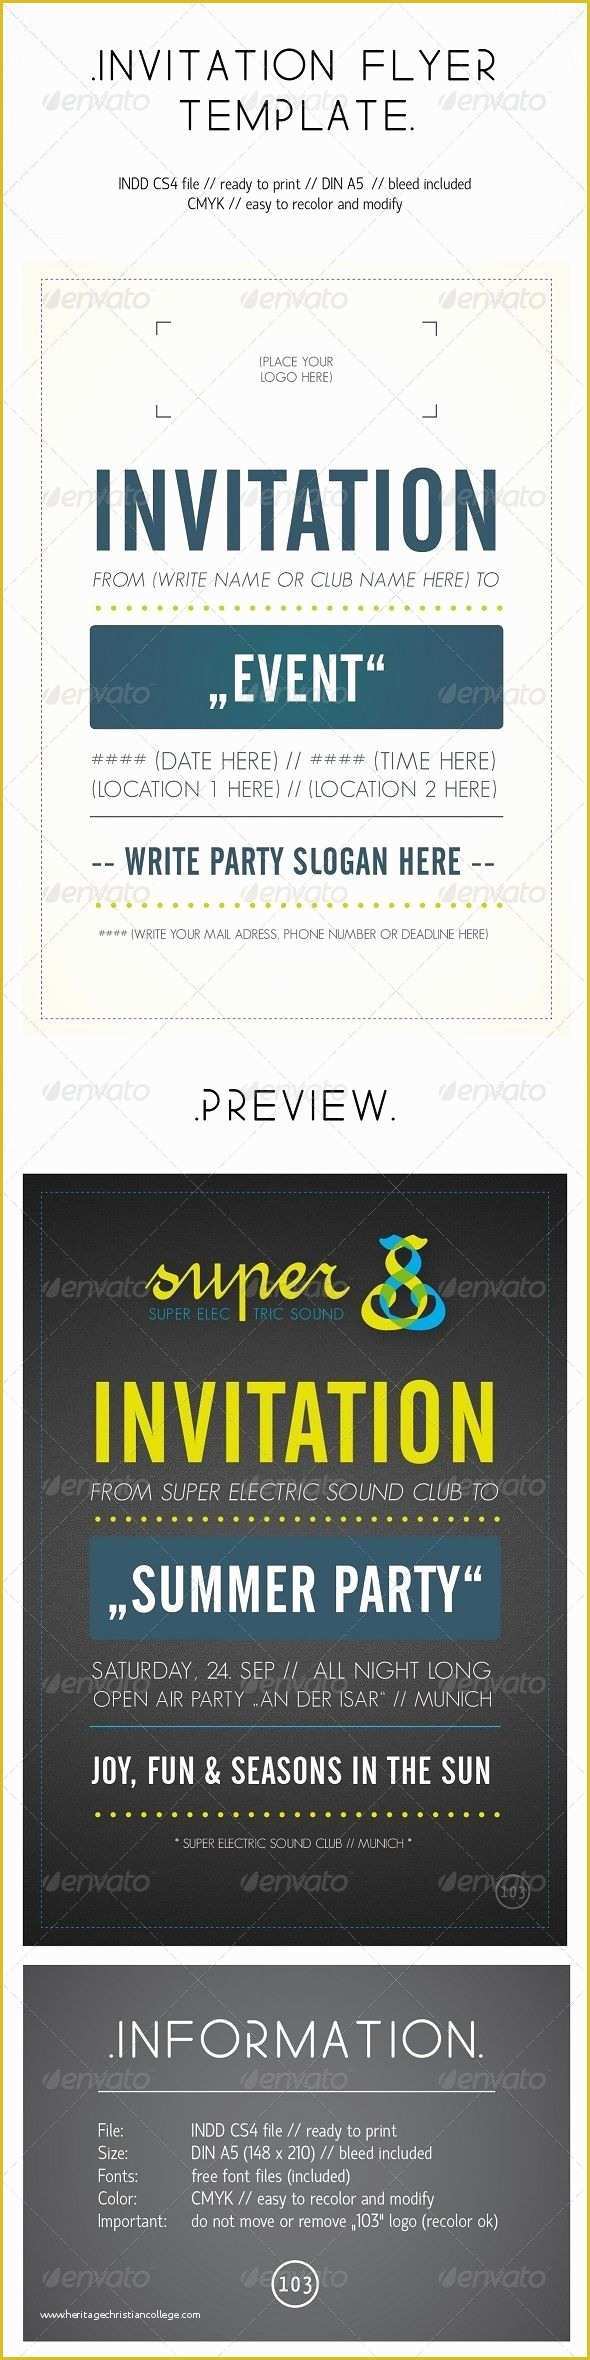 Indesign Invitation Template Free Of Invitation Flyer Template Invitations Card Template